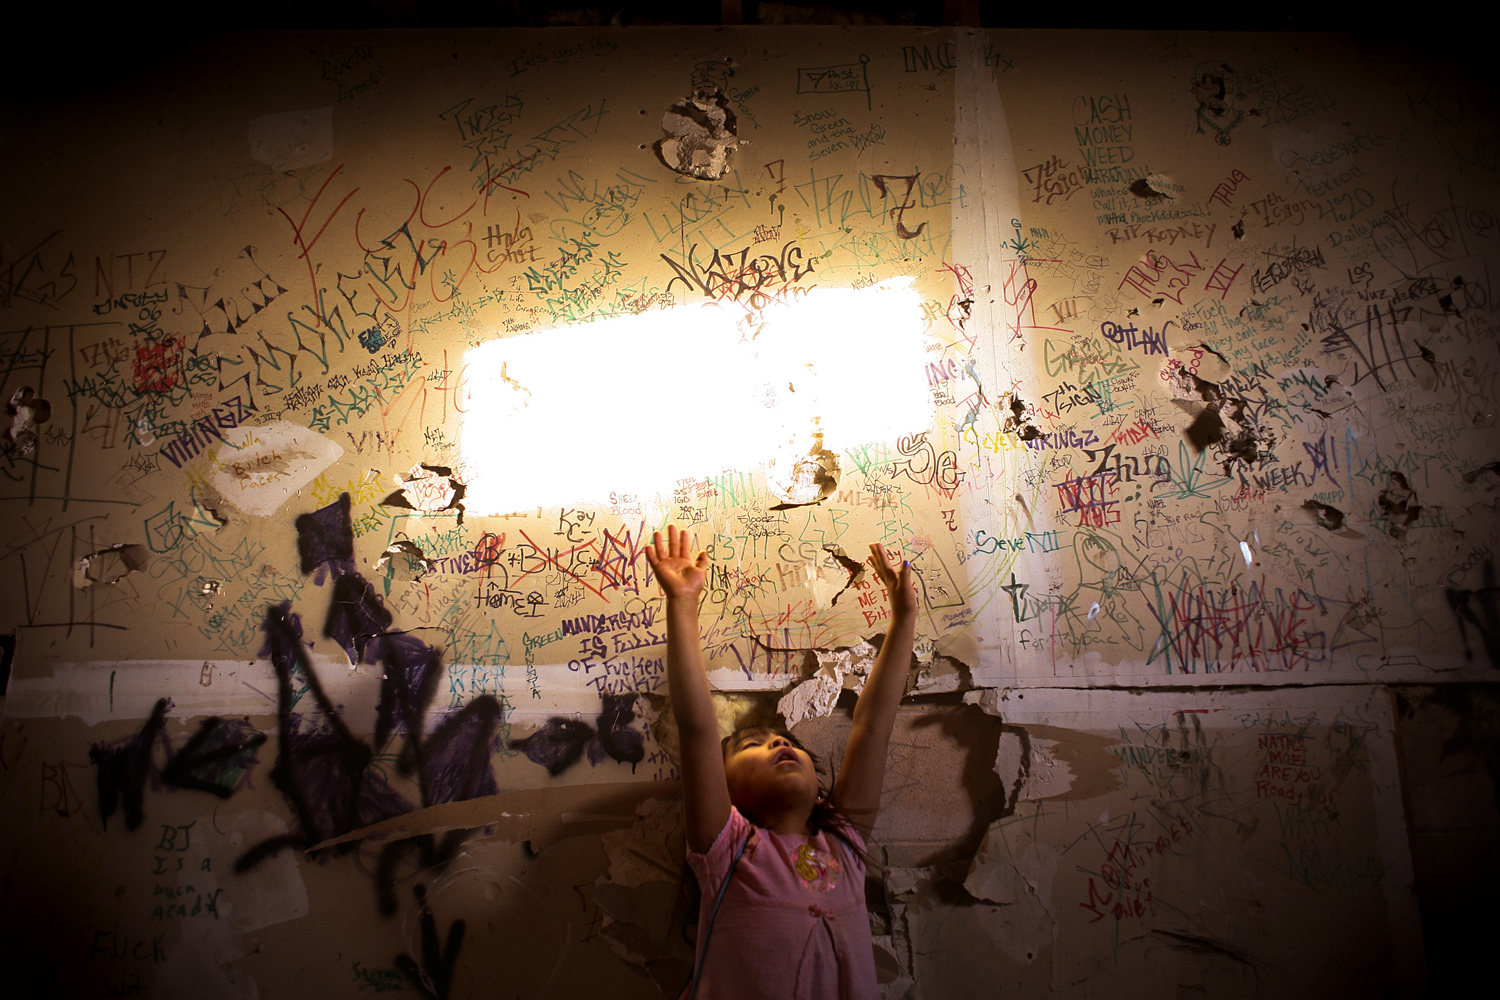 A young girl plays in a basement with graffiti covered walls, Manderson, SD.